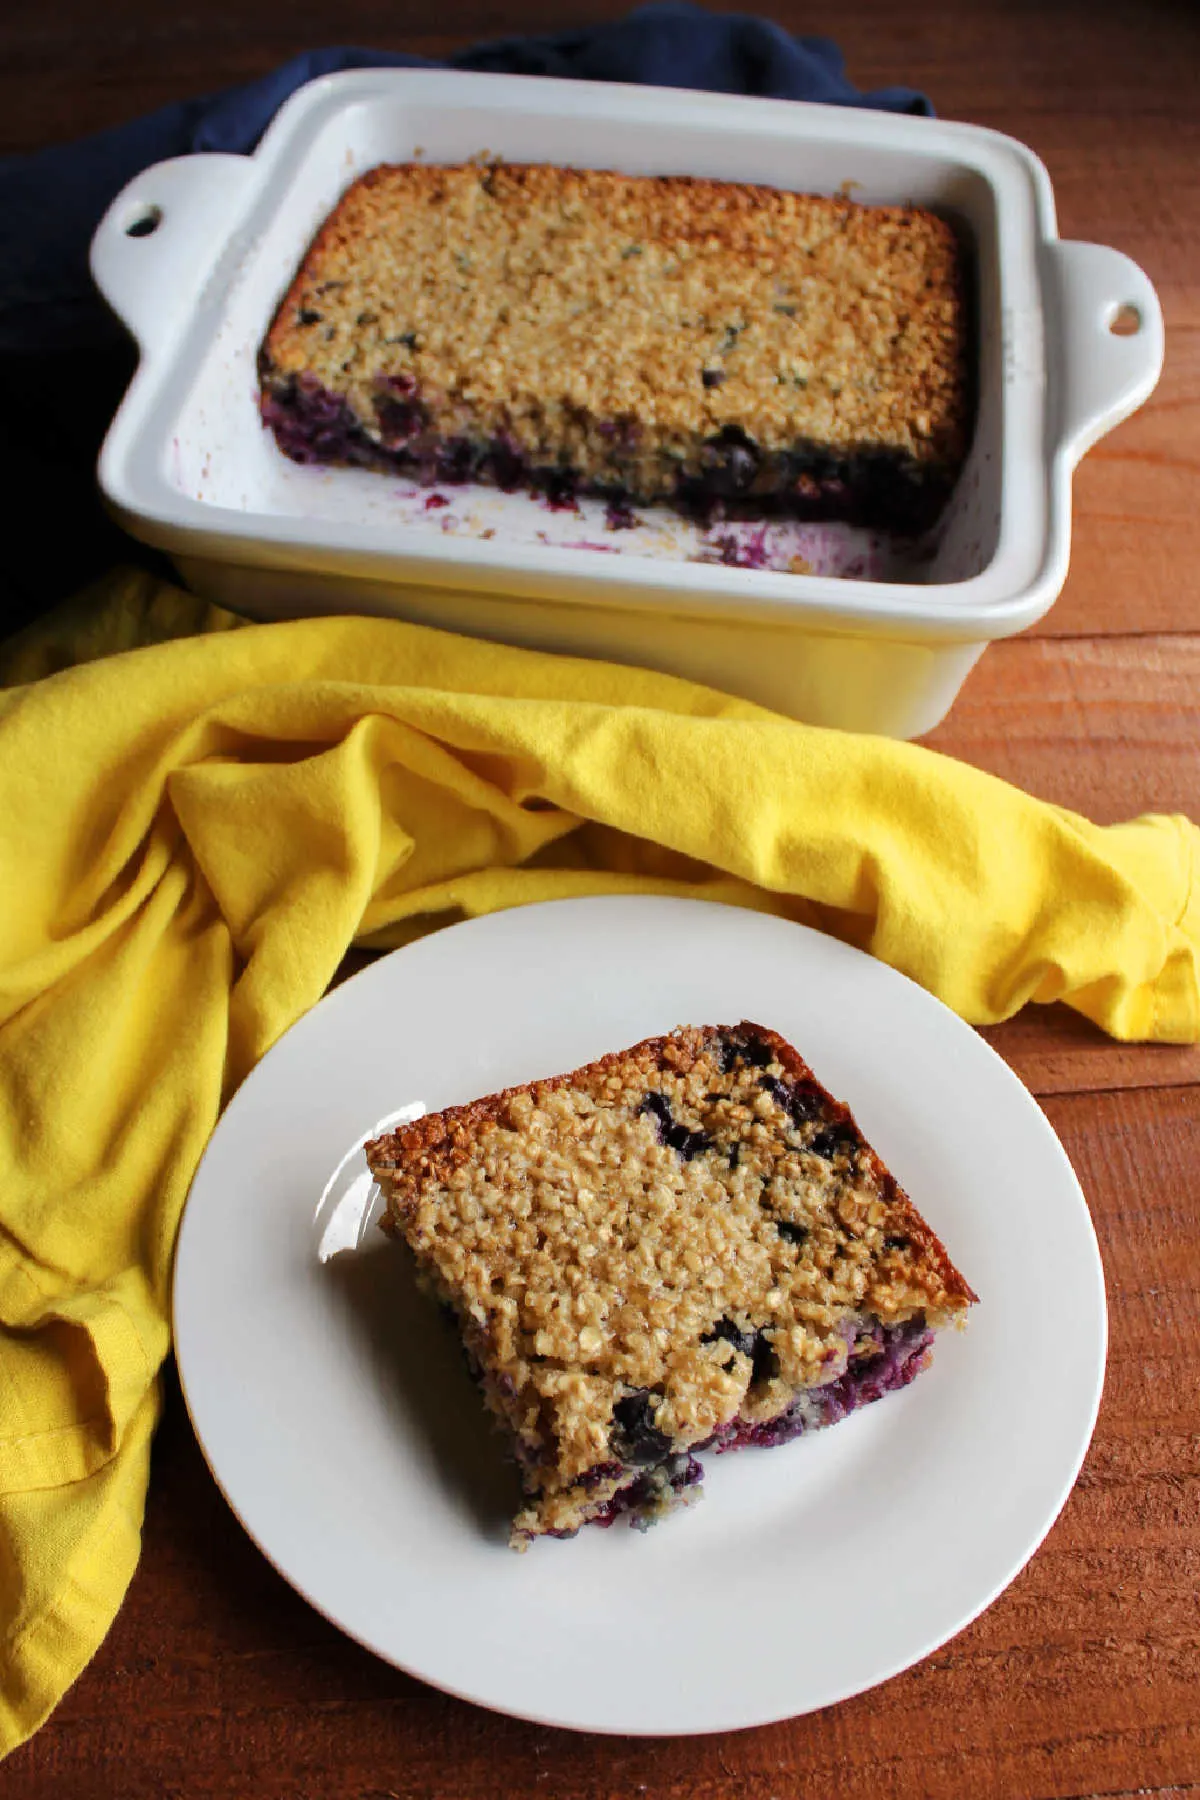 Square of lemon blueberry baked oats on small plate with square baking dish containing more oatmeal in the background.